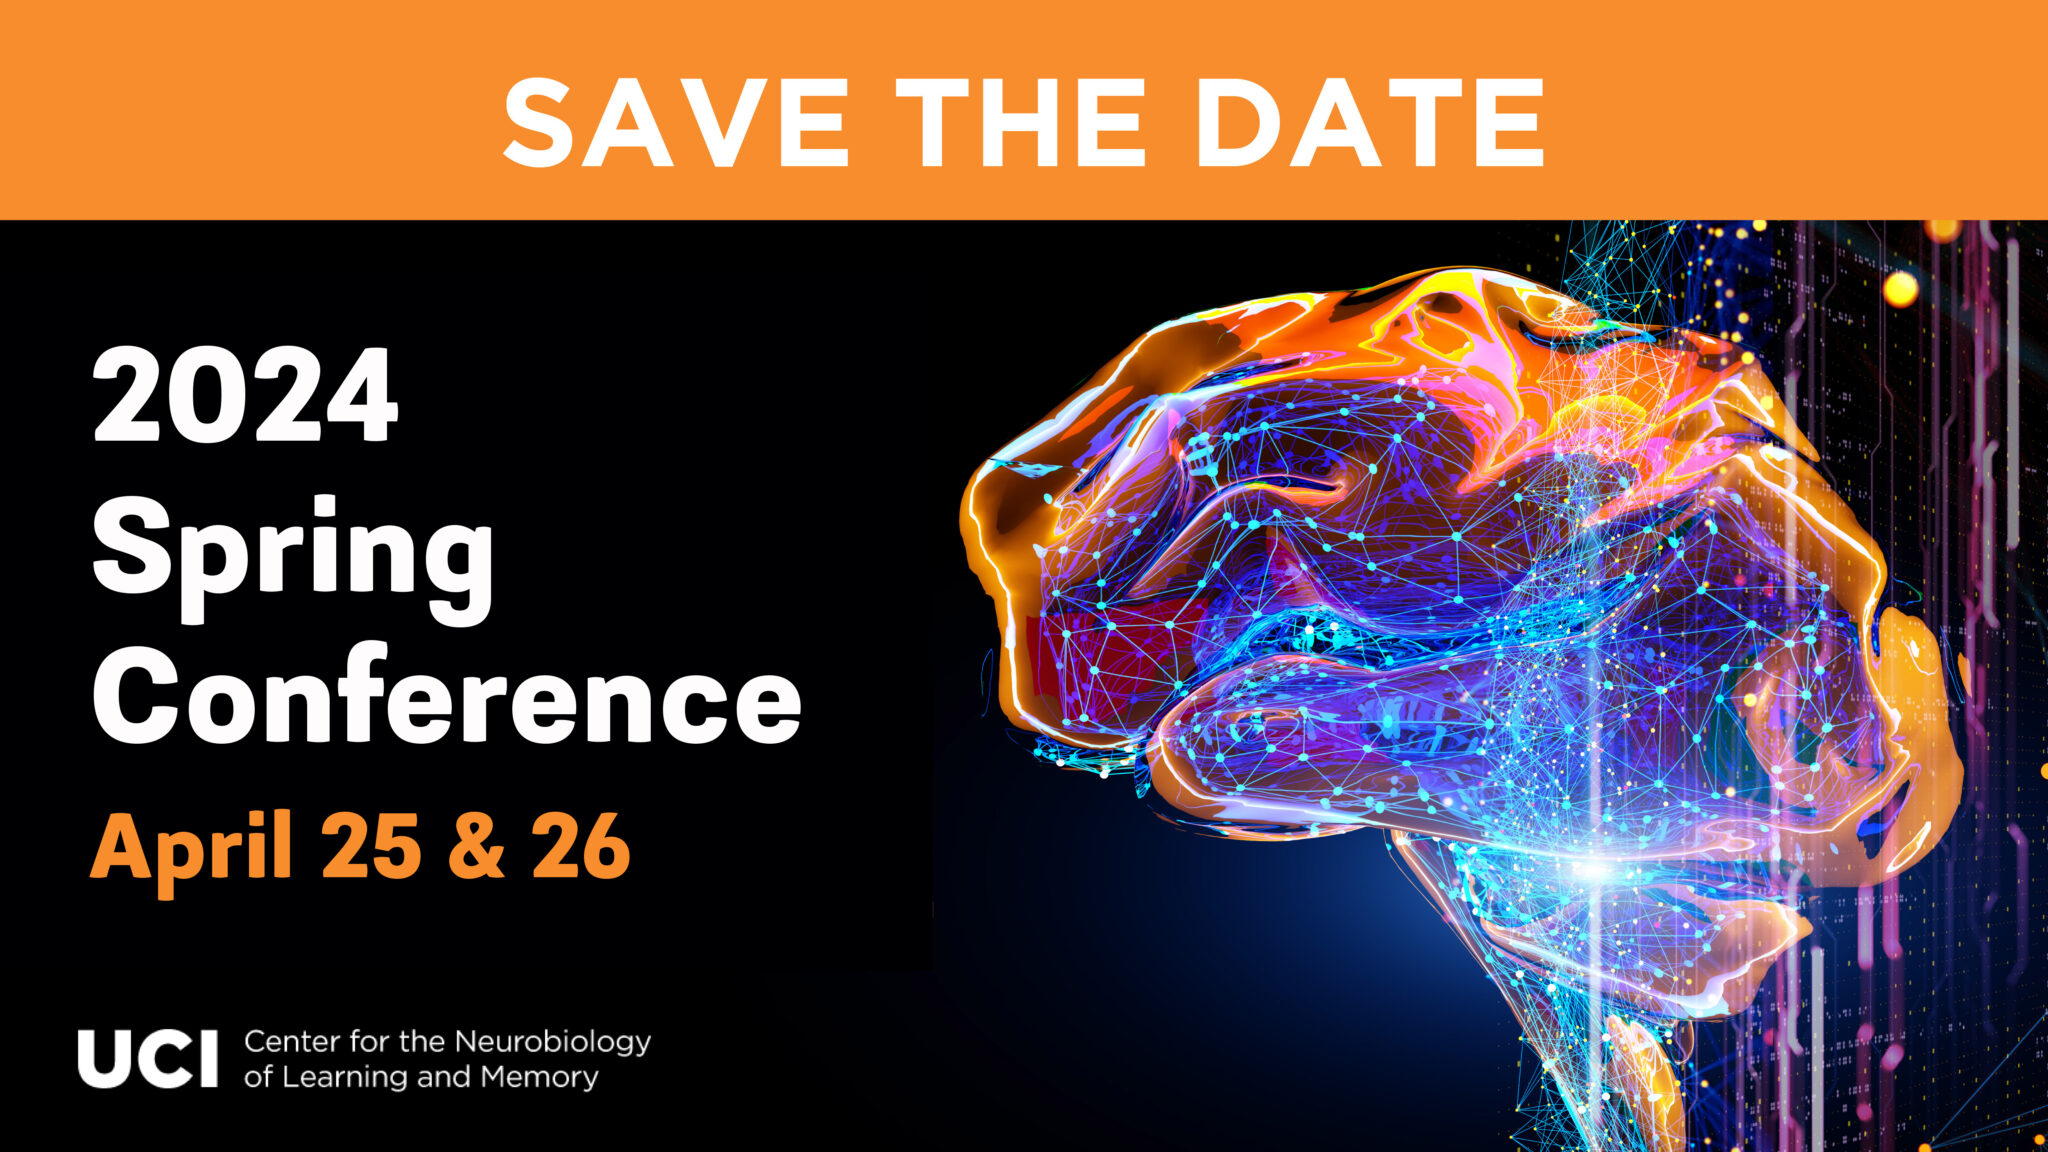 Scientific Conferences Center for the Neurobiology of Learning and